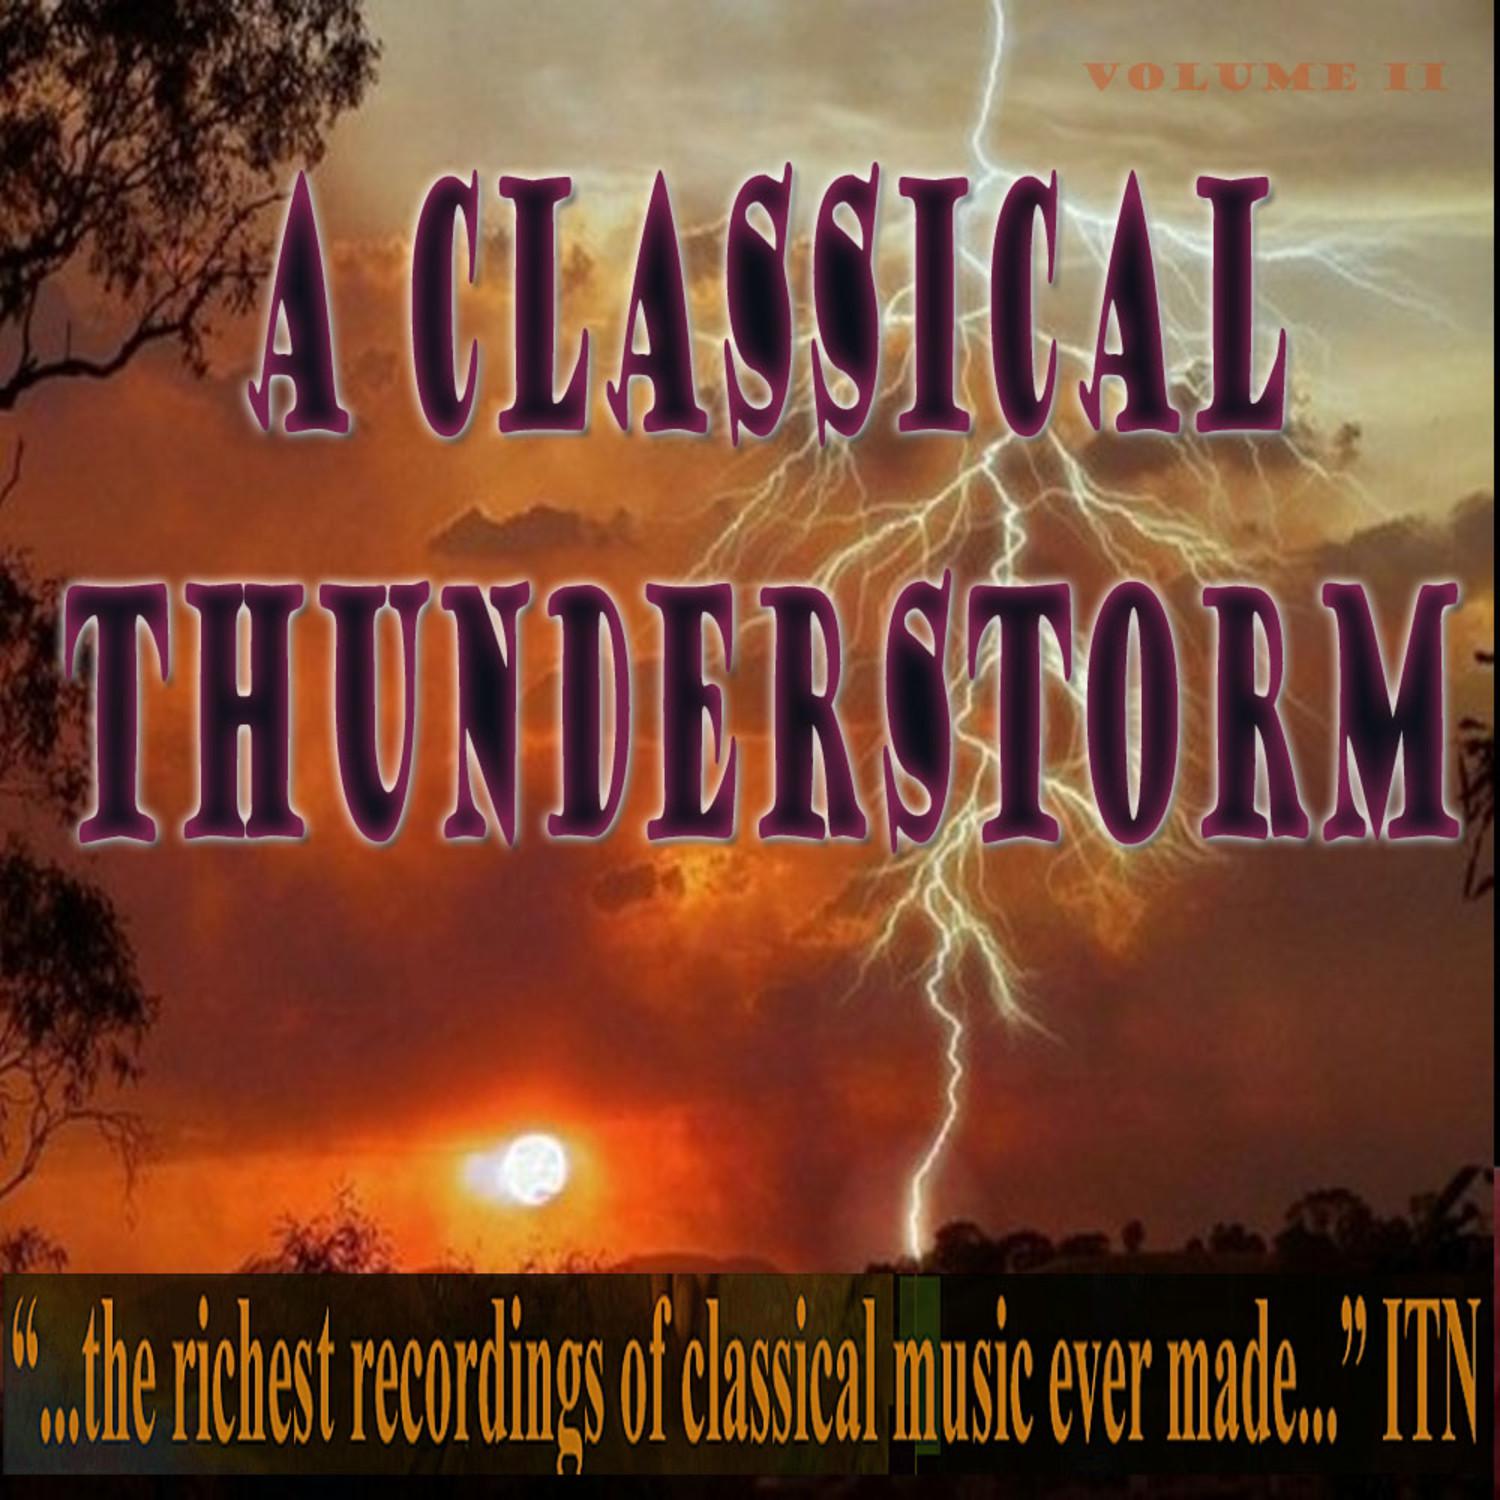 A Classical Thunderstorm Volume 2